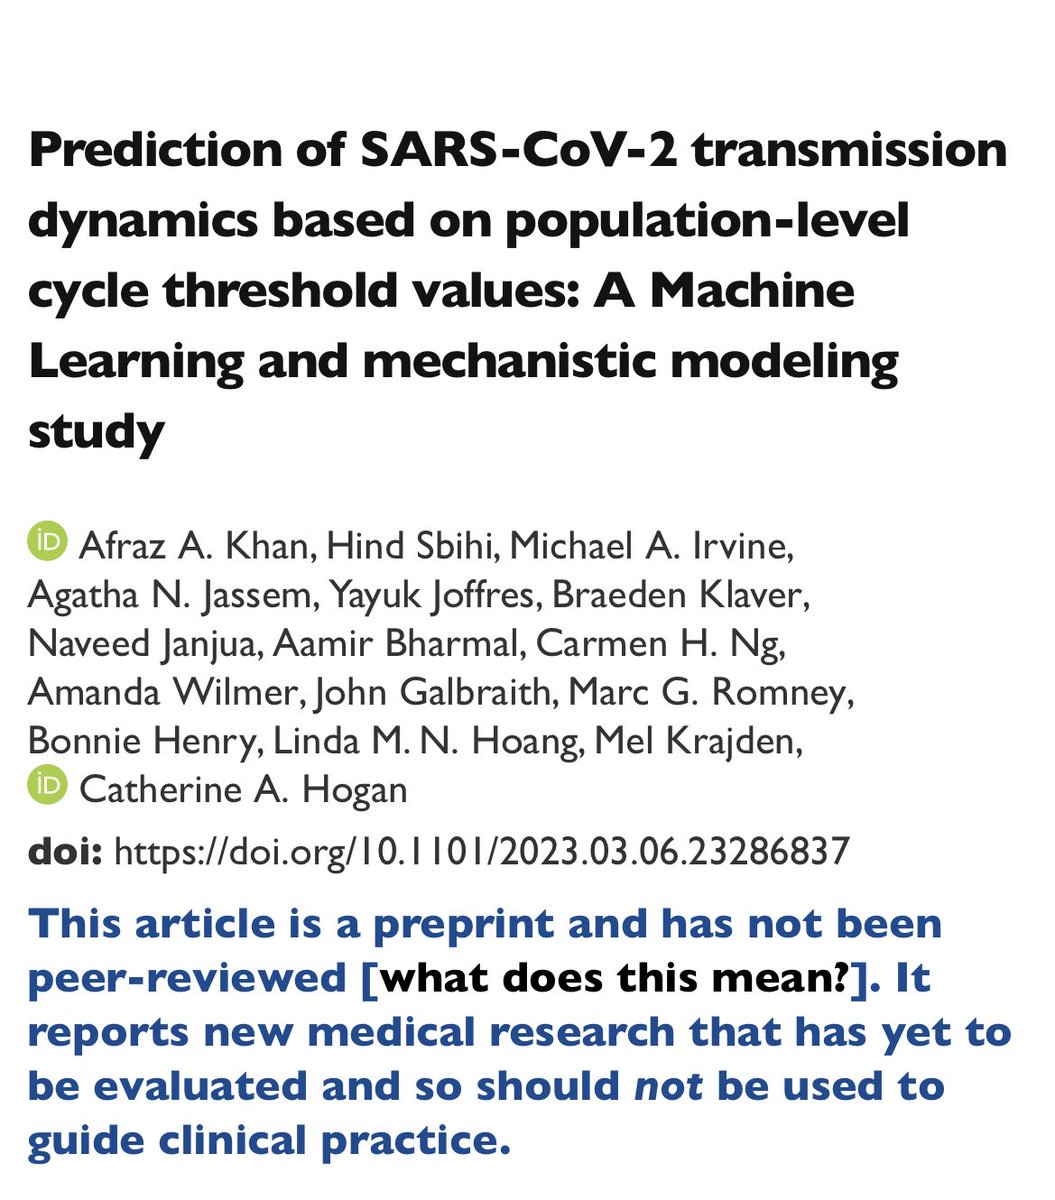 So, the authors, including Bonnie Henry, designed a model that accurately predicted SARS-CoV-2 infection and decided to… do nothing to stop it.